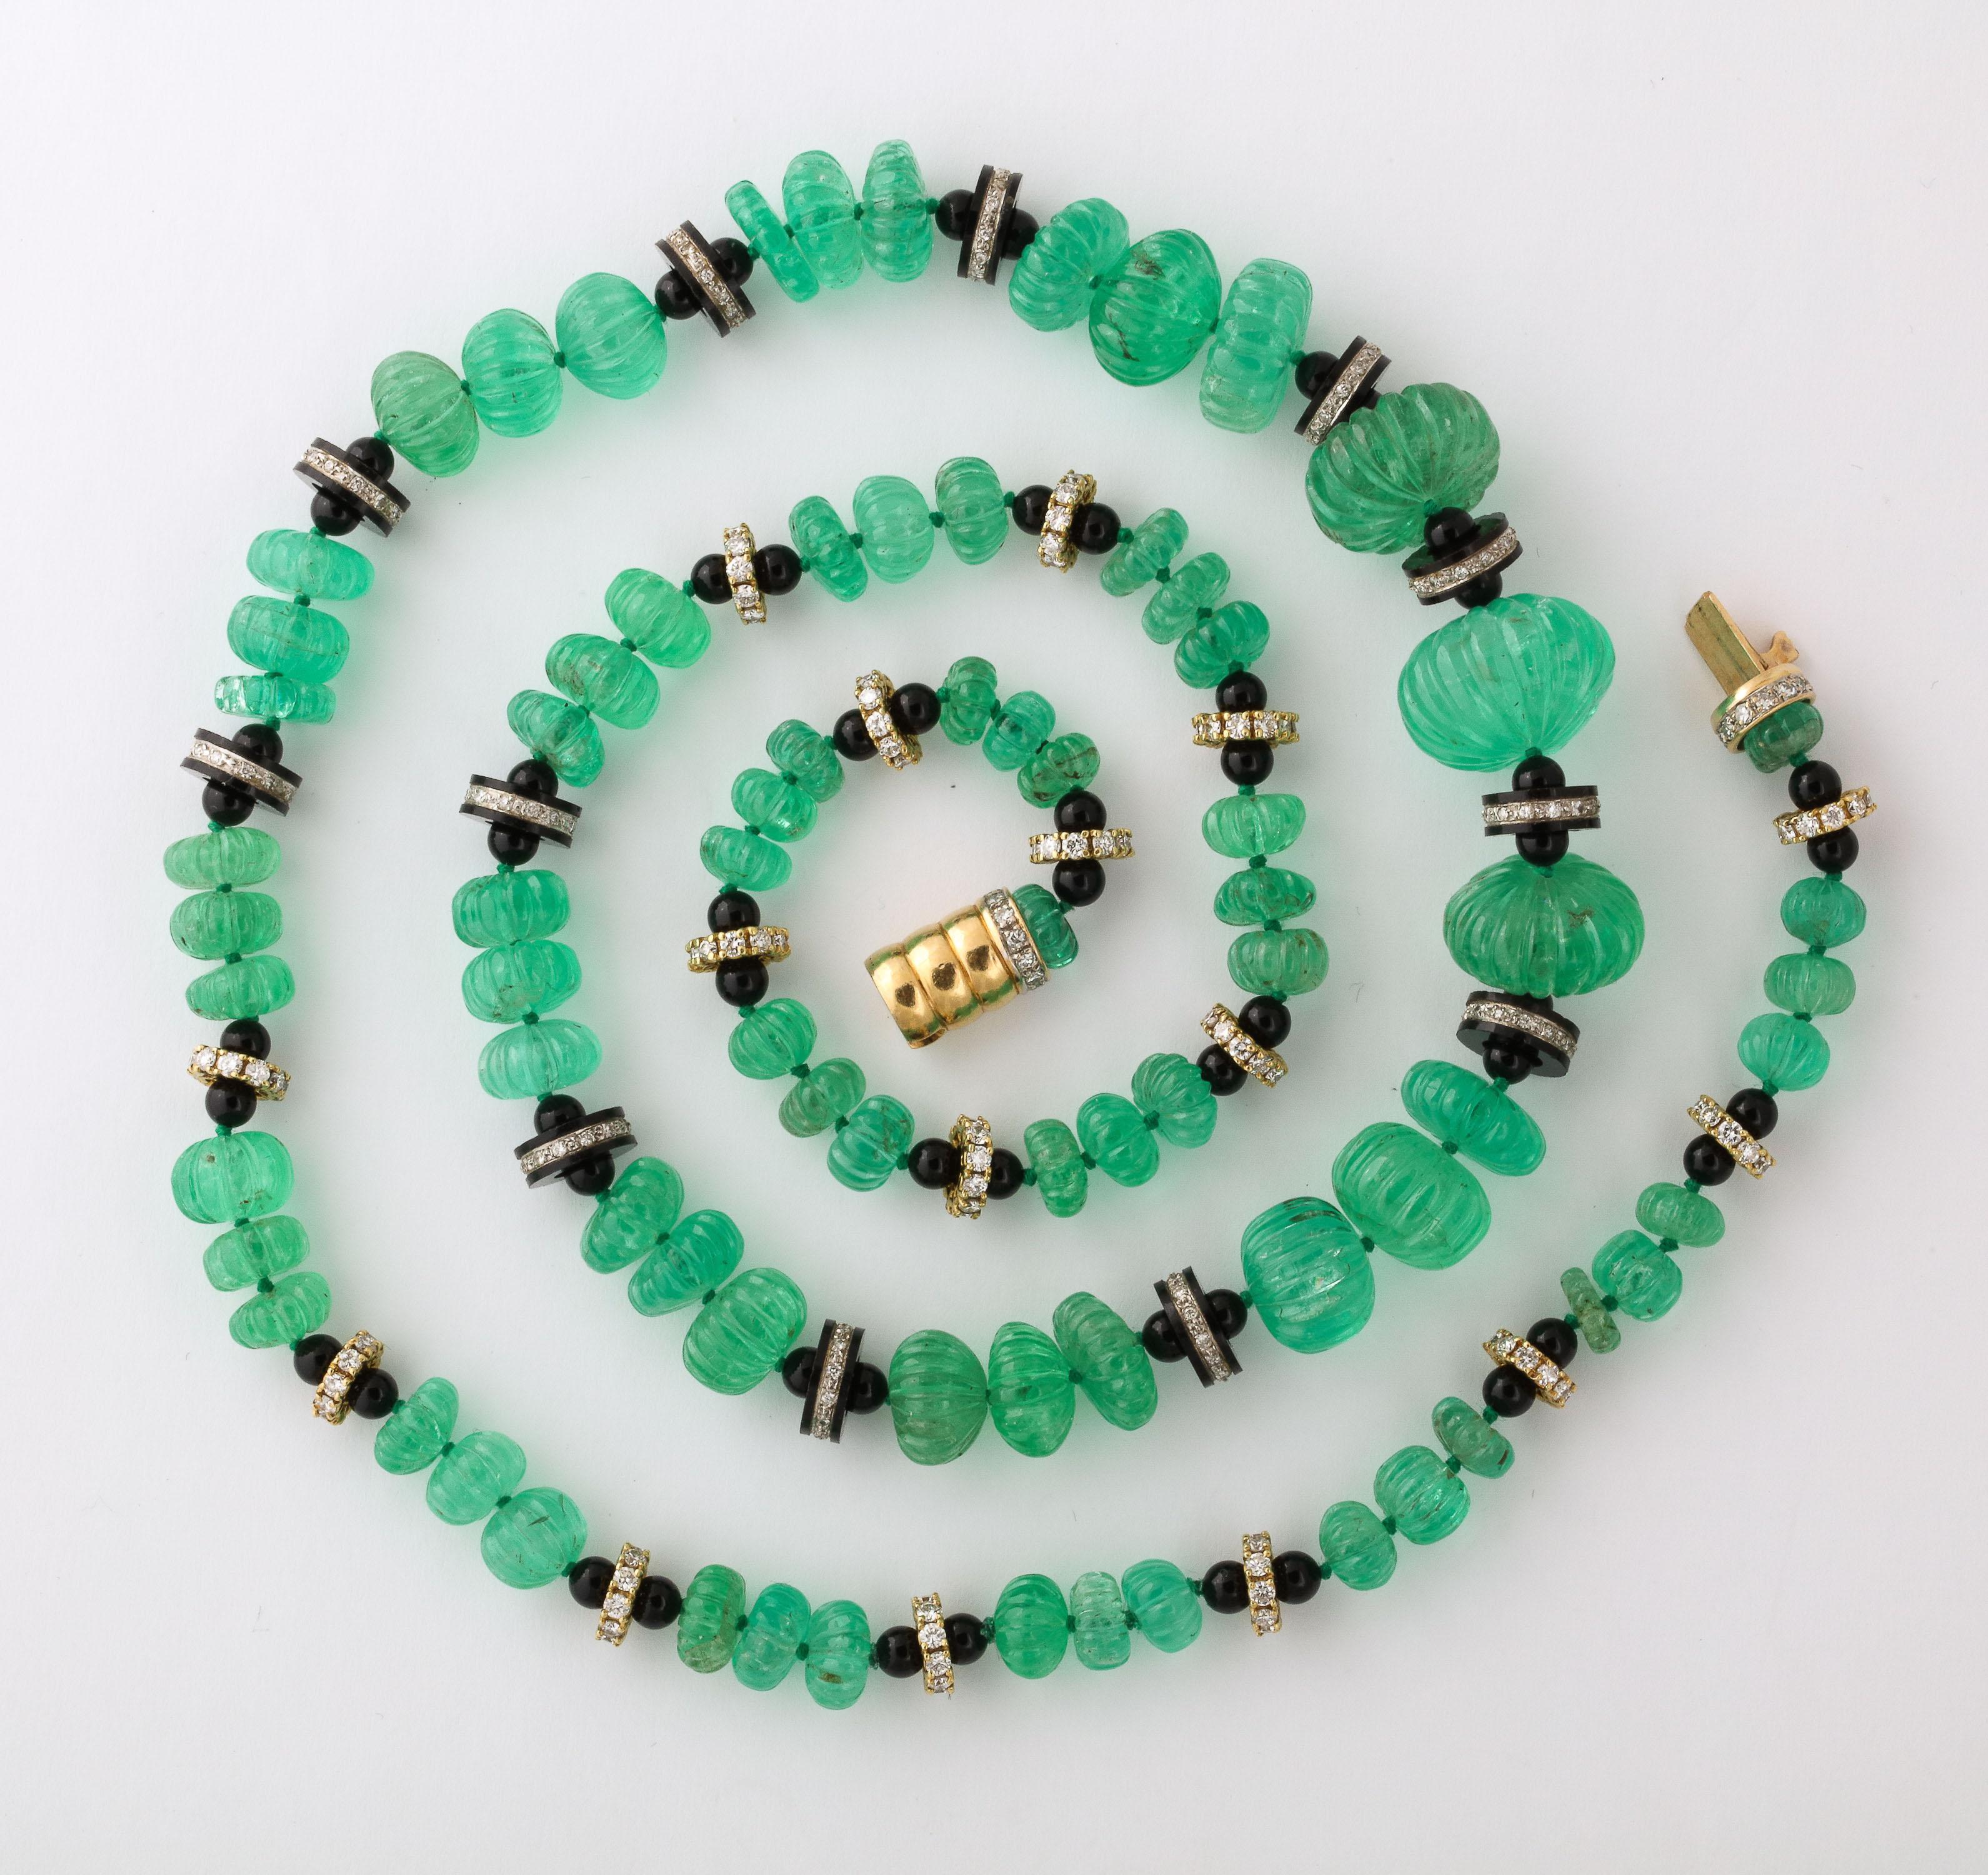 Sumptuous Long necklace of Carved graduated Emerald Beads with Black Onyx & Diamond spacers terminating with a Yellow Gold & Diamond Clasp.  Wow - what a look.  Over 300 carats of Emeralds & 3  carats of Diamonds.  
